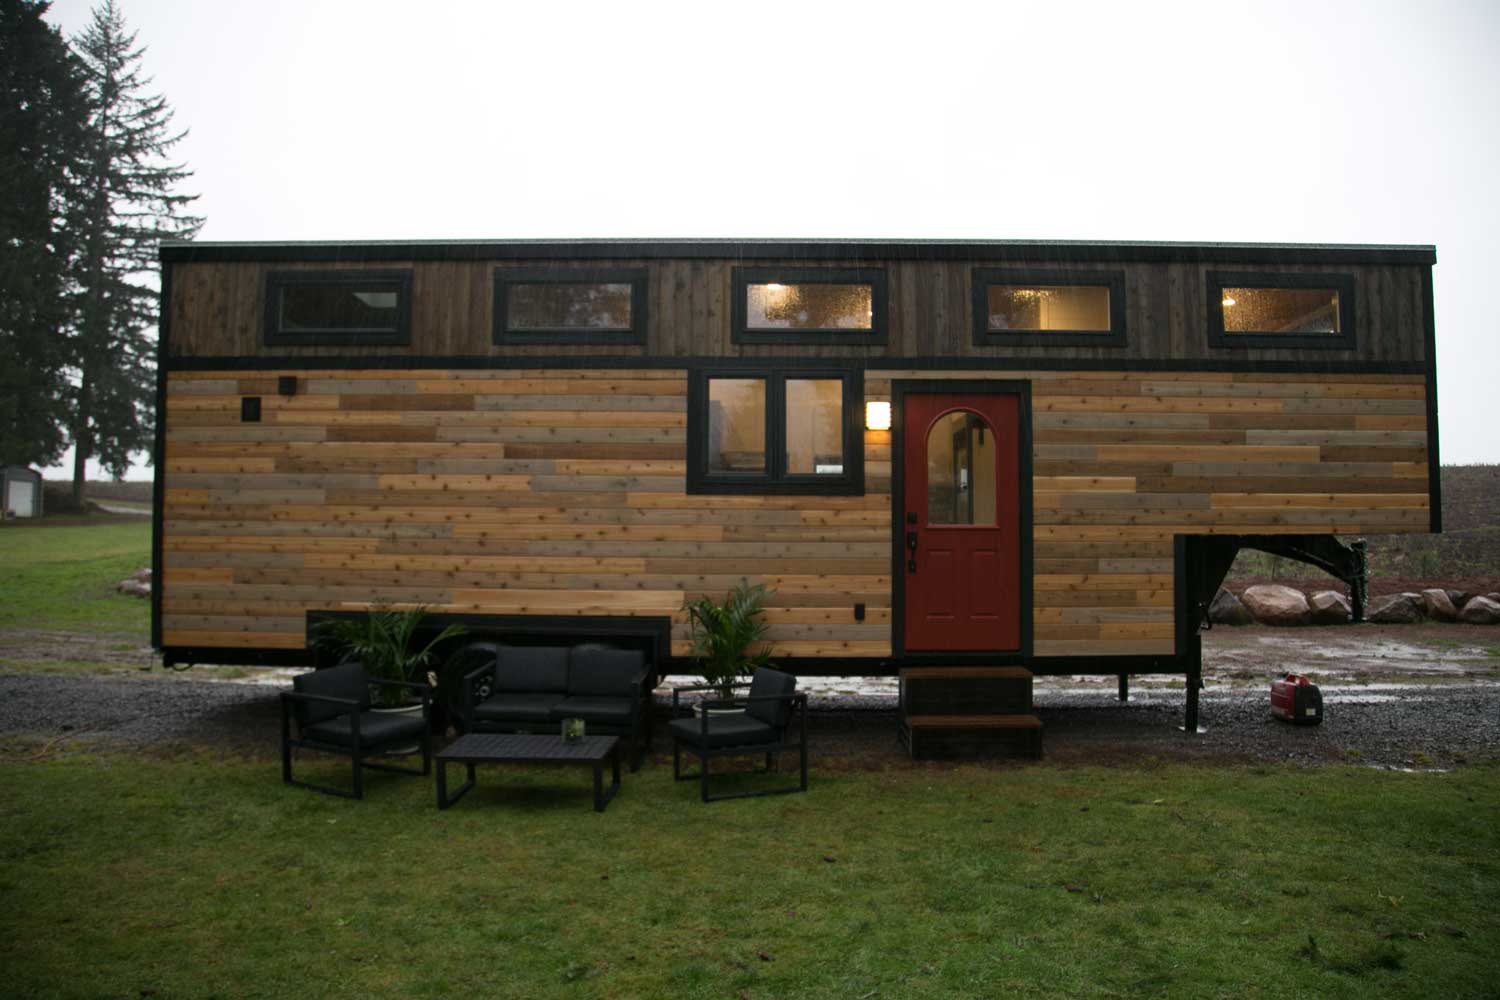 Exterior of the Tiny Travelling Dream Home tiny house